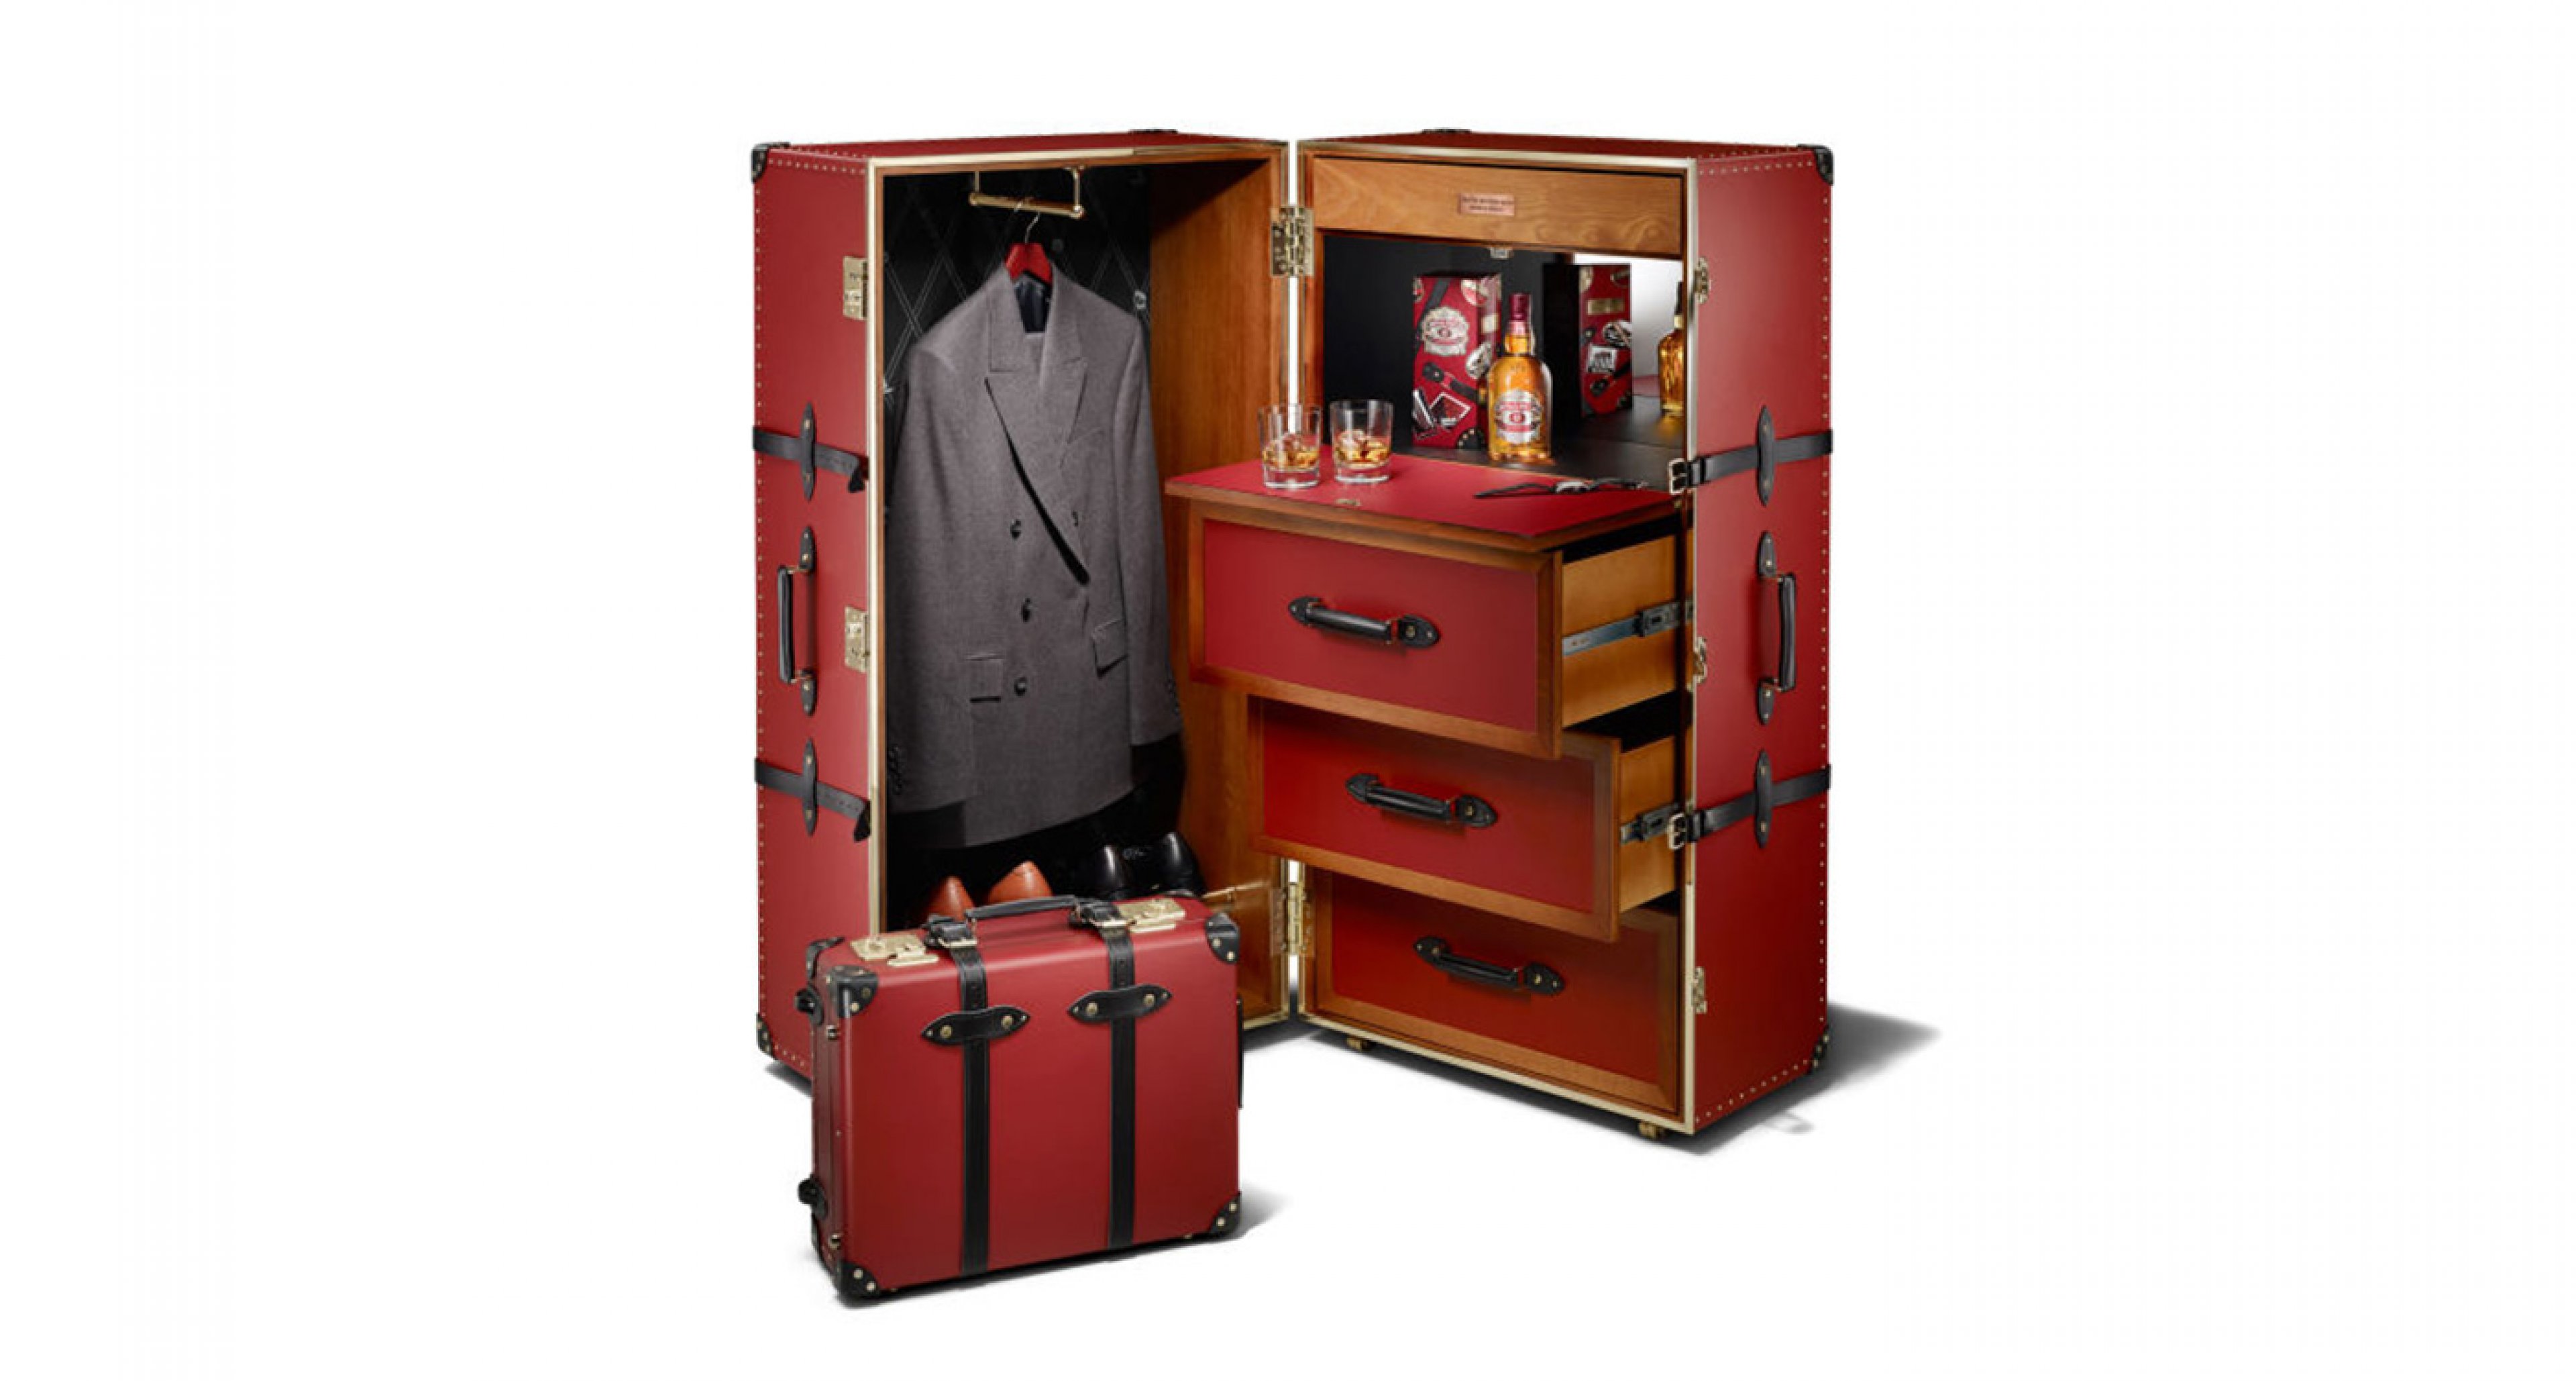 Is this steamer trunk the ultimate gentleman’s travel